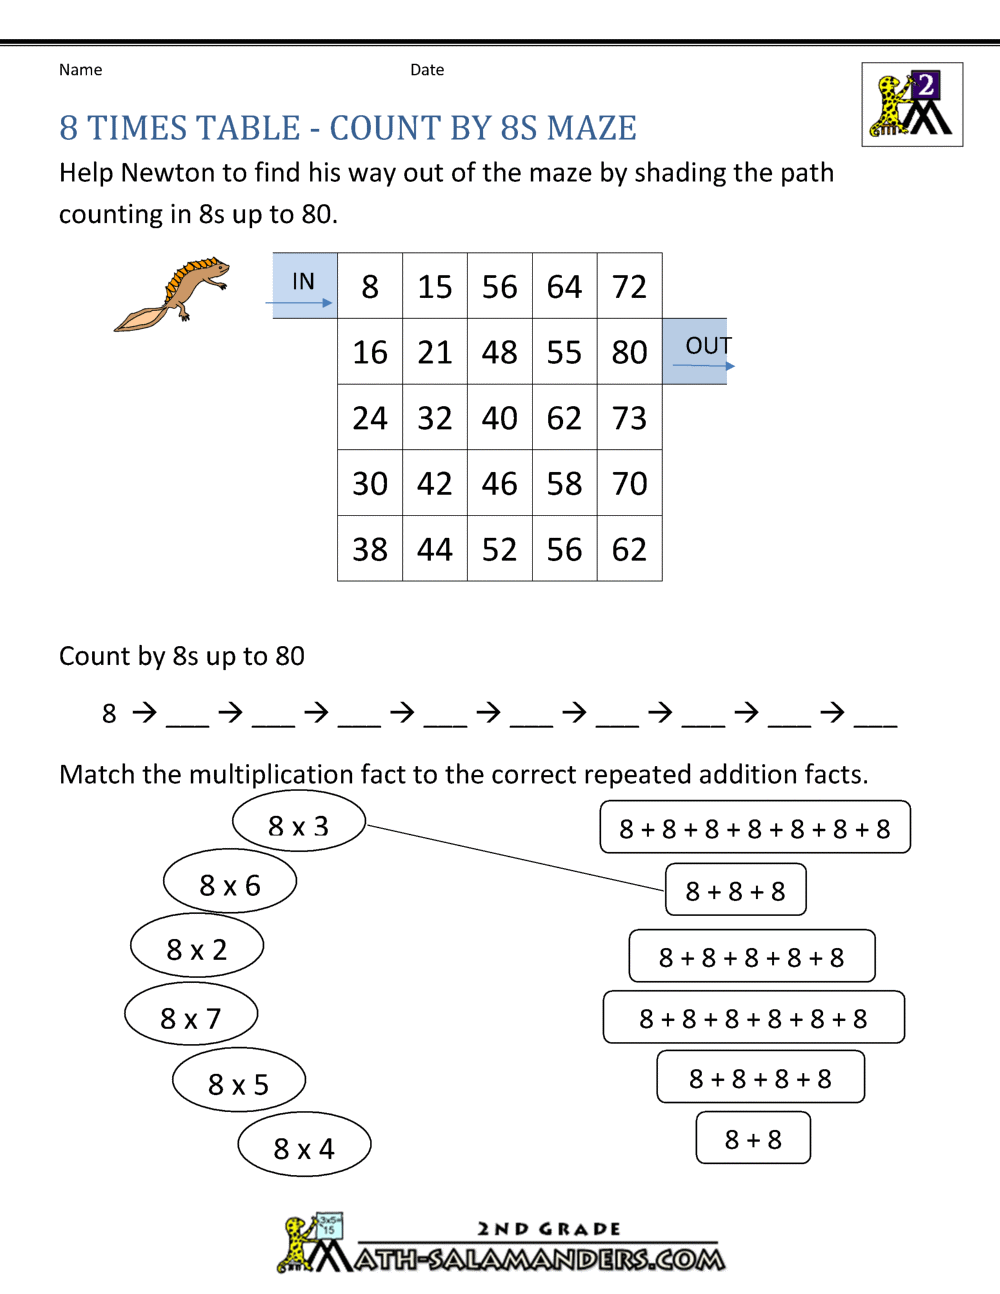 multiplication drill worksheets 8 times tables